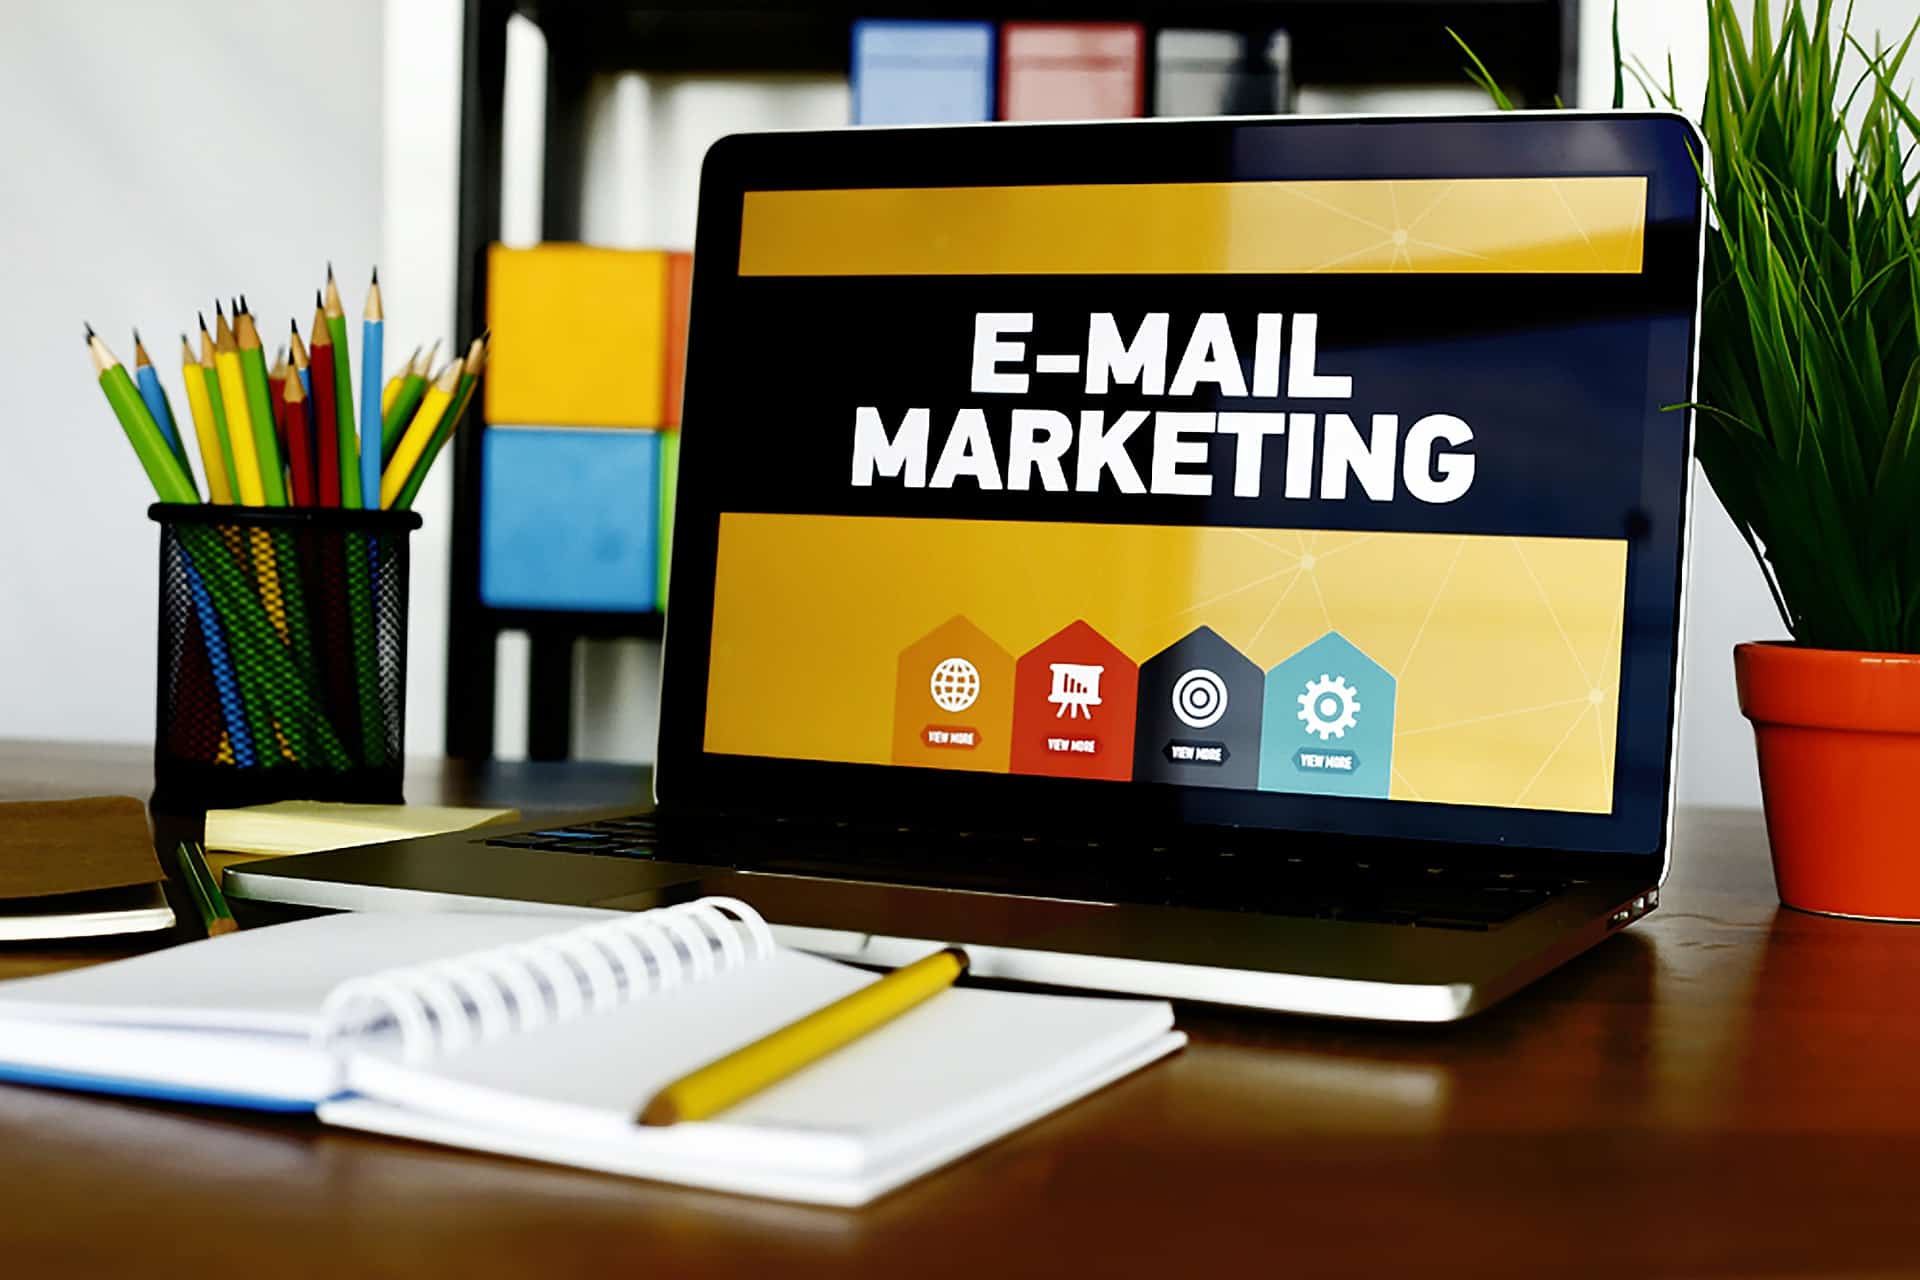 How To Run An Email Marketing Campaign - Dale Schaefer